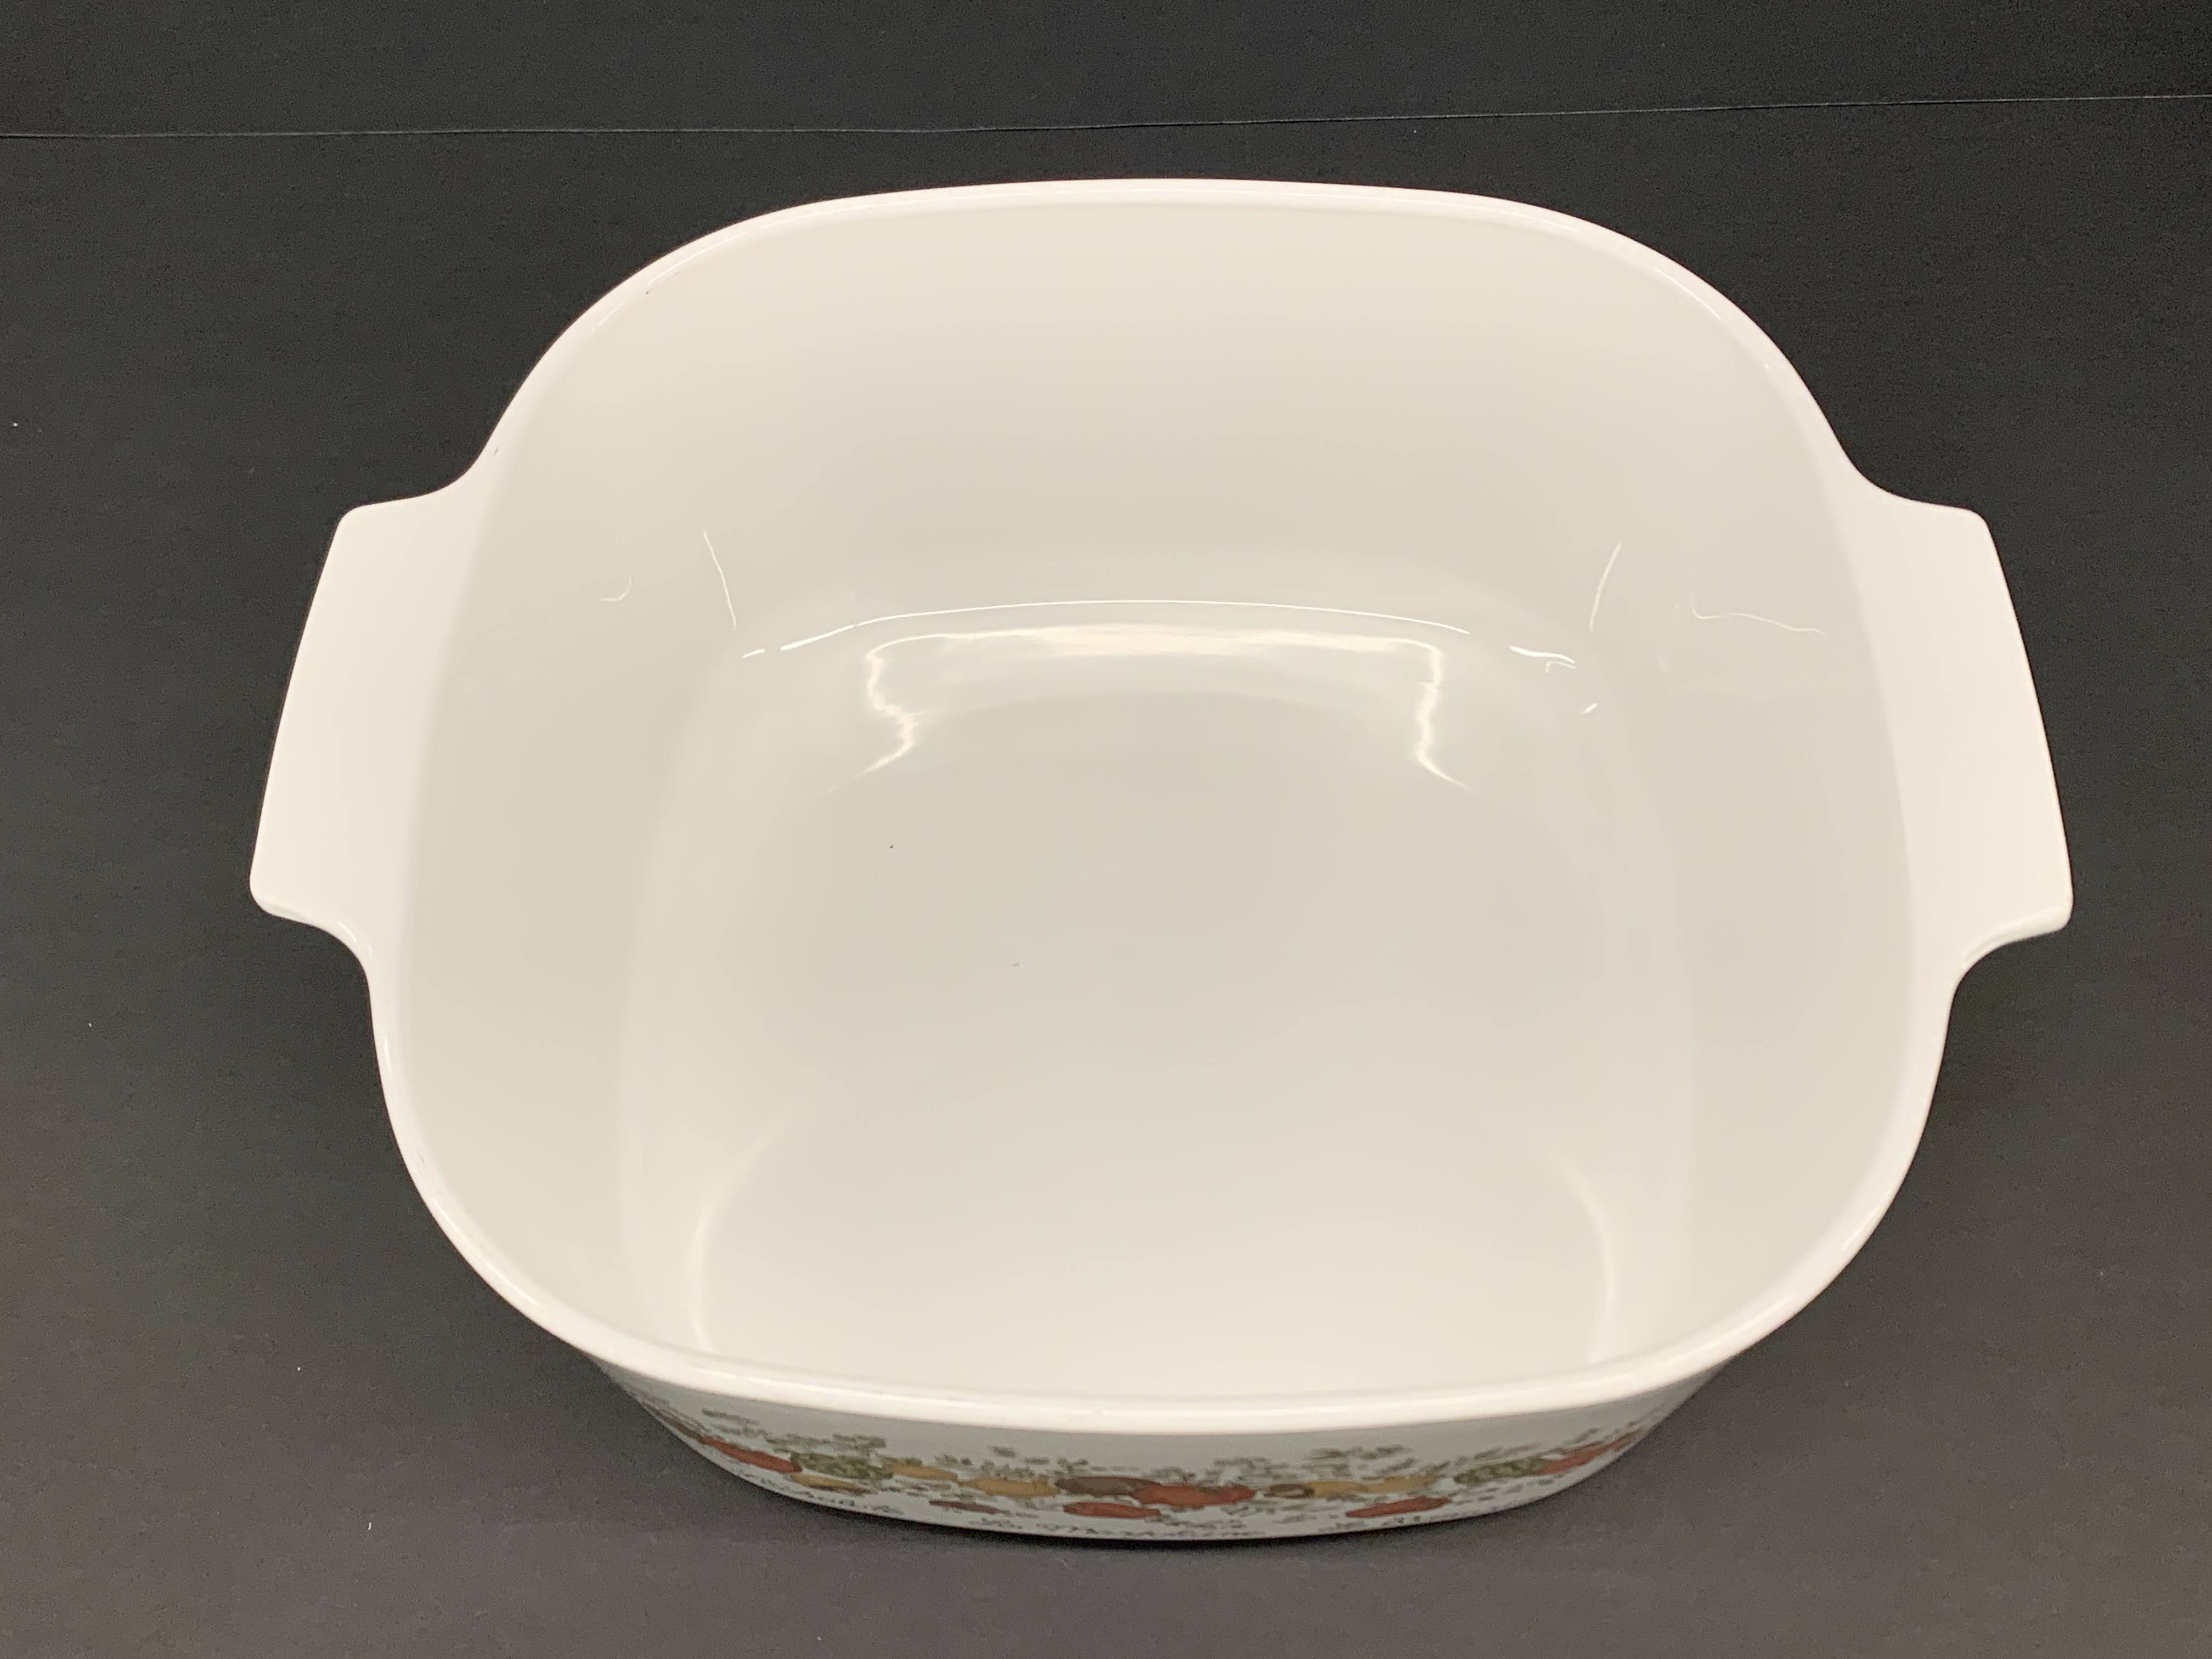 Spice Of Life - Corning Ware Casserole - Square Shape With Lid